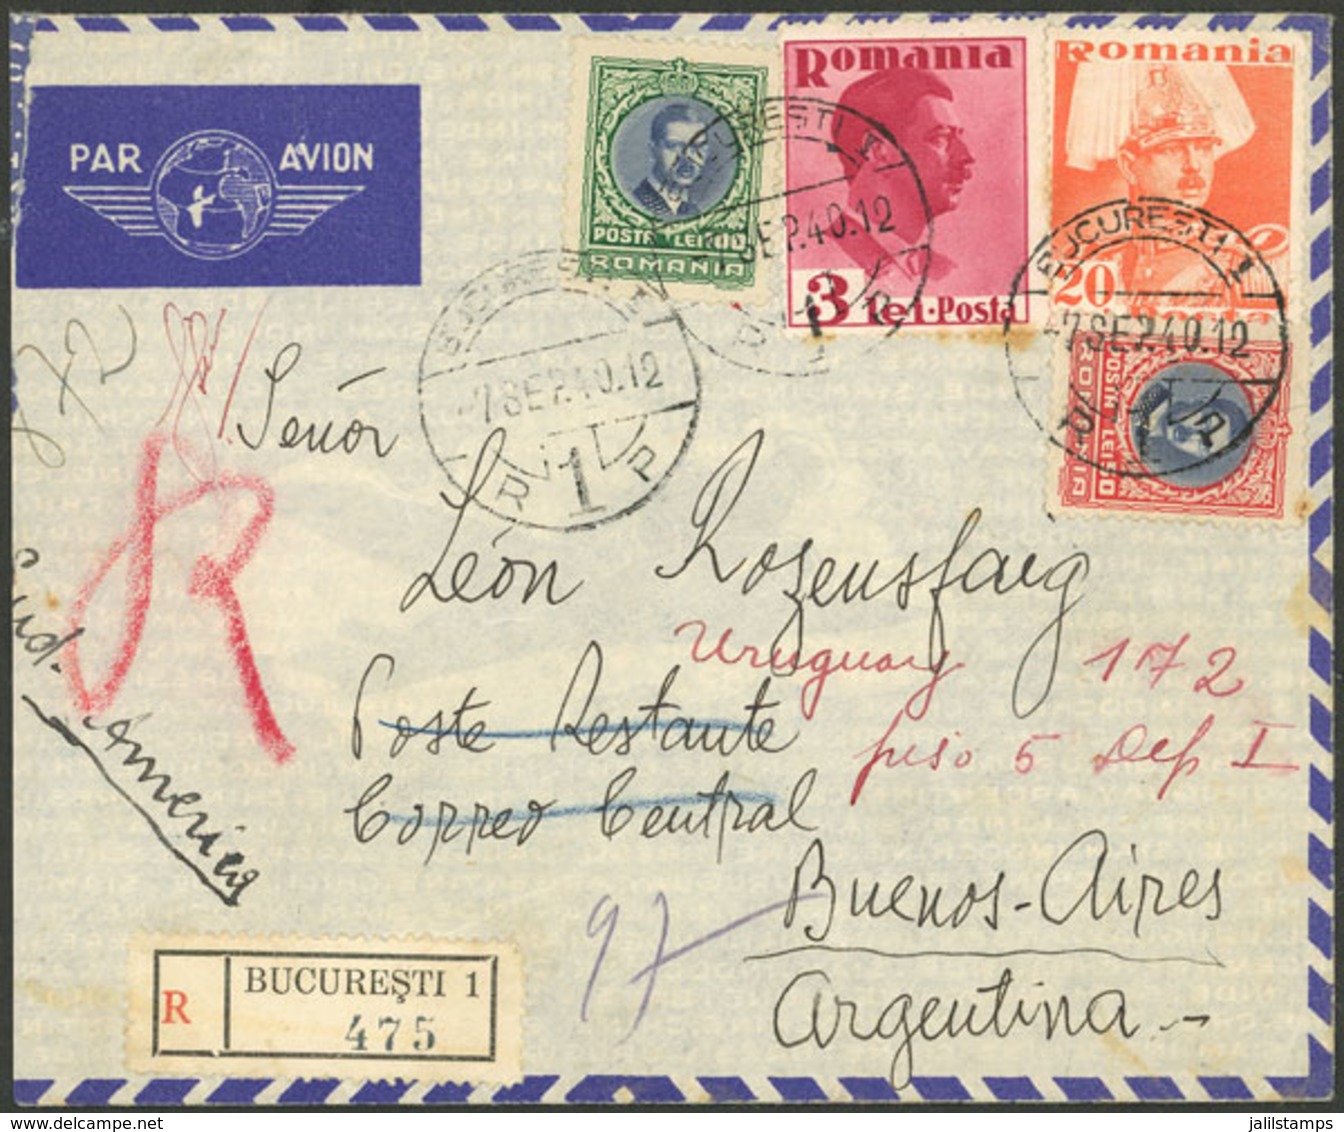 ROMANIA: 7/SE/1940 Bucharest - Argentina, Registered Airmail Cover With Nice 4-color Postage, Arrival Backstamp, Unusual - Storia Postale